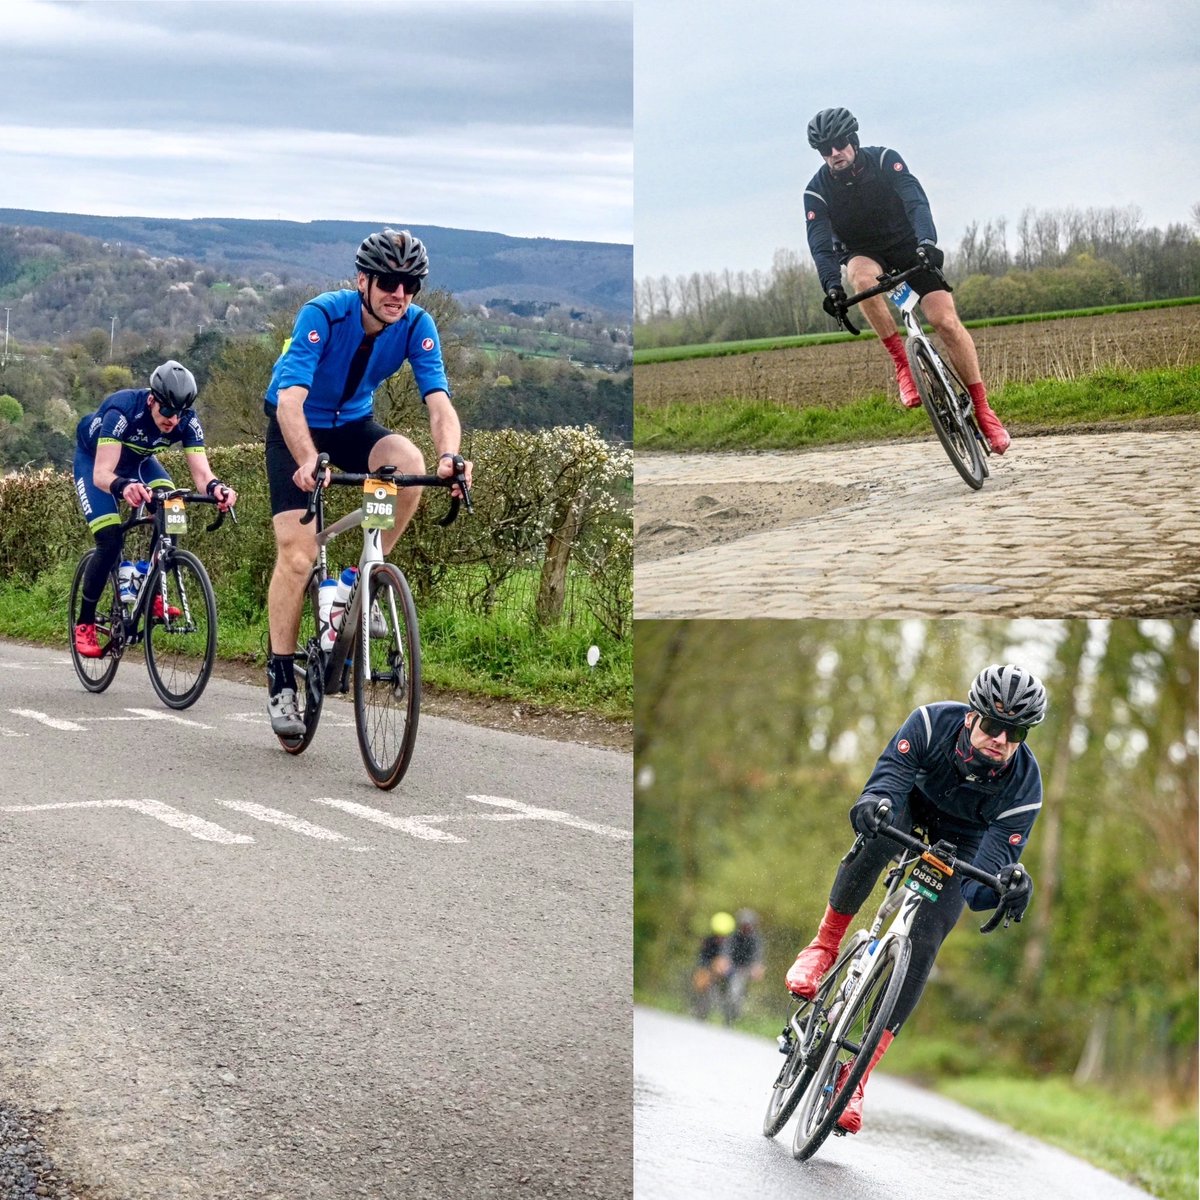 Had a lot of fun riding the sportive events of three cycling monuments: Flanders - Roubaix - Liege.  Each one with it's own challenges, in mixed weather conditions. Next up: climbing the Stelvio (twice). #cycling #werideflanders #ParisRoubaix #liegebastogneliege